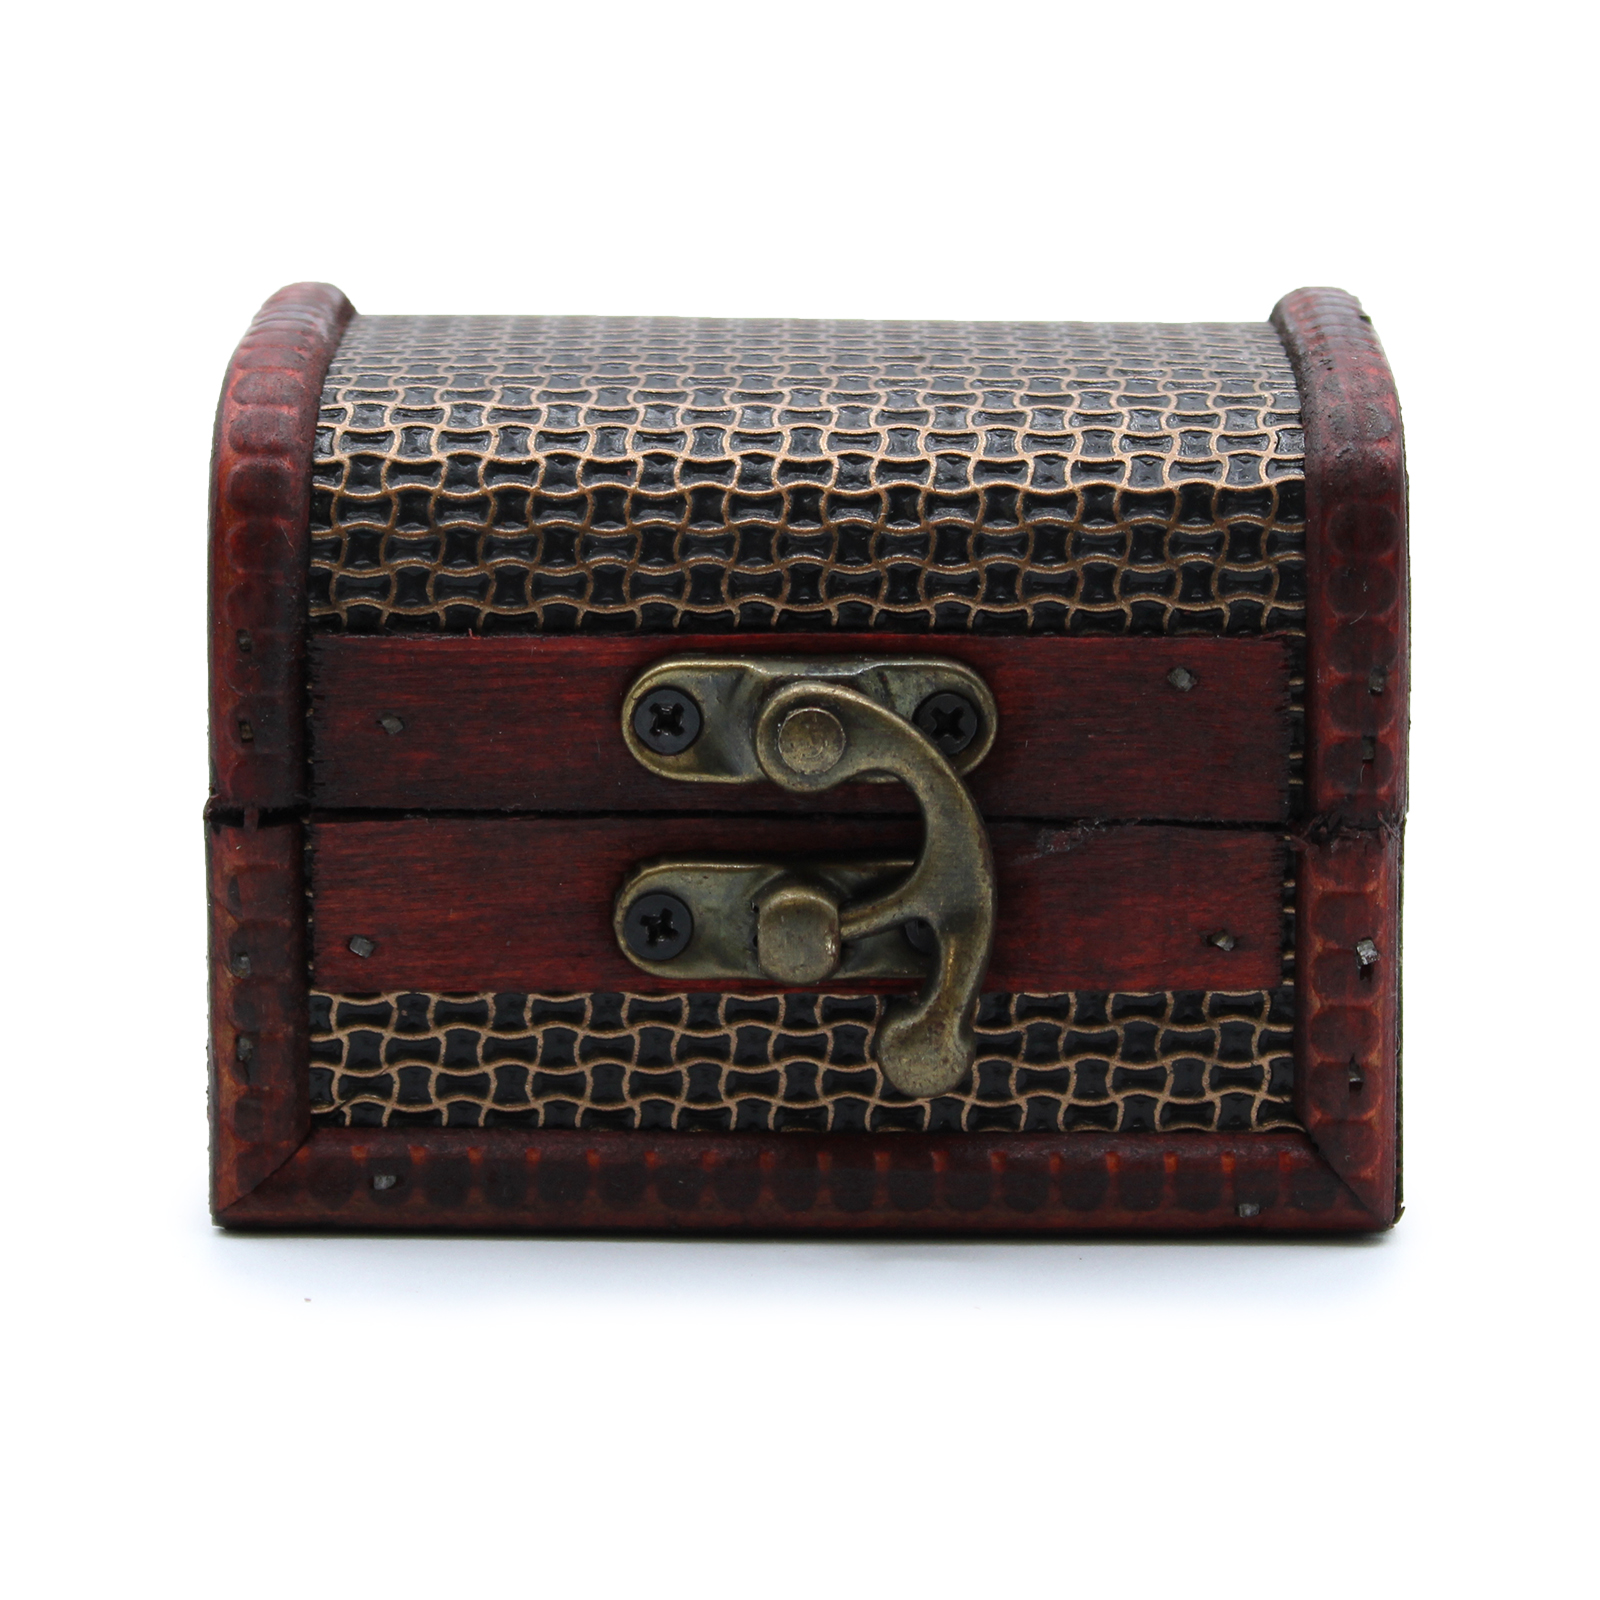 Med Colonial Boxes - Mesh Embossed